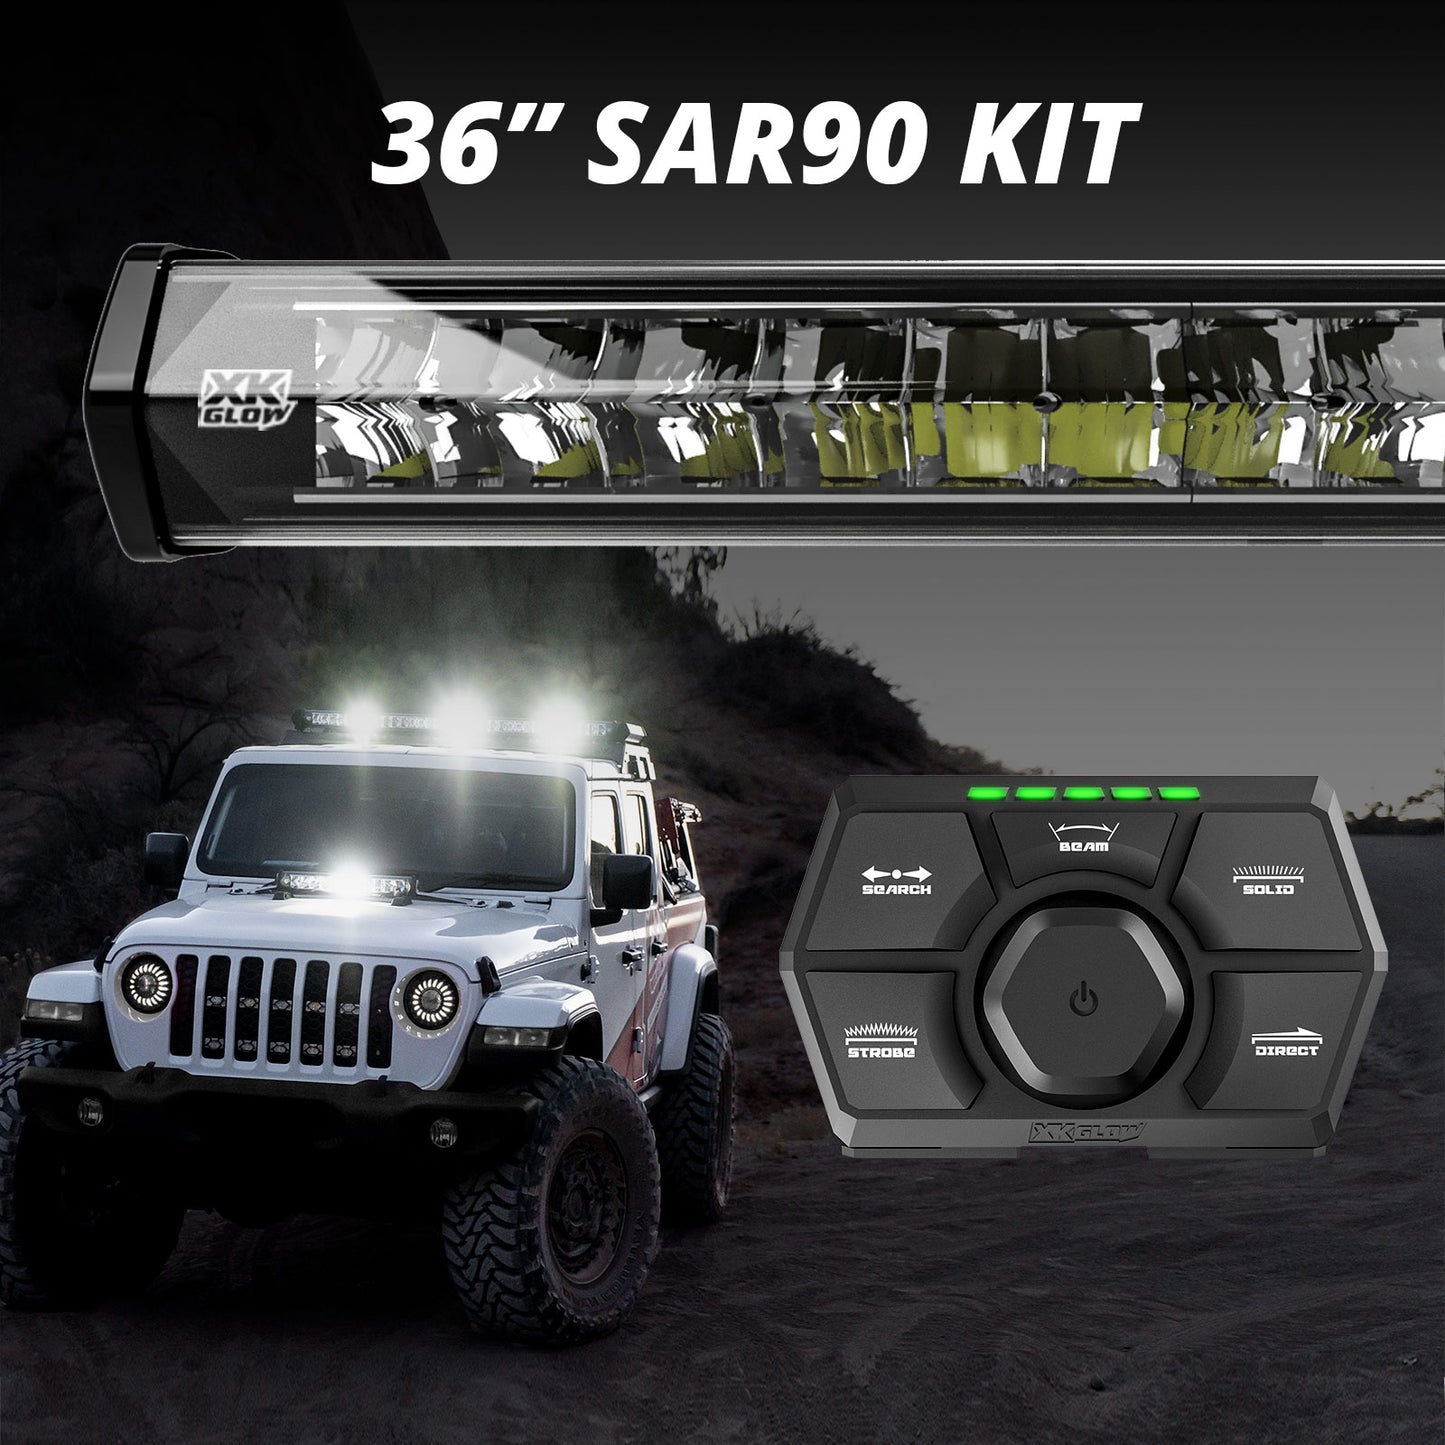 XKGLOW XK-SAR90-2 36” SAR90 Light Bar Kit Emergency Search and Rescue Light System